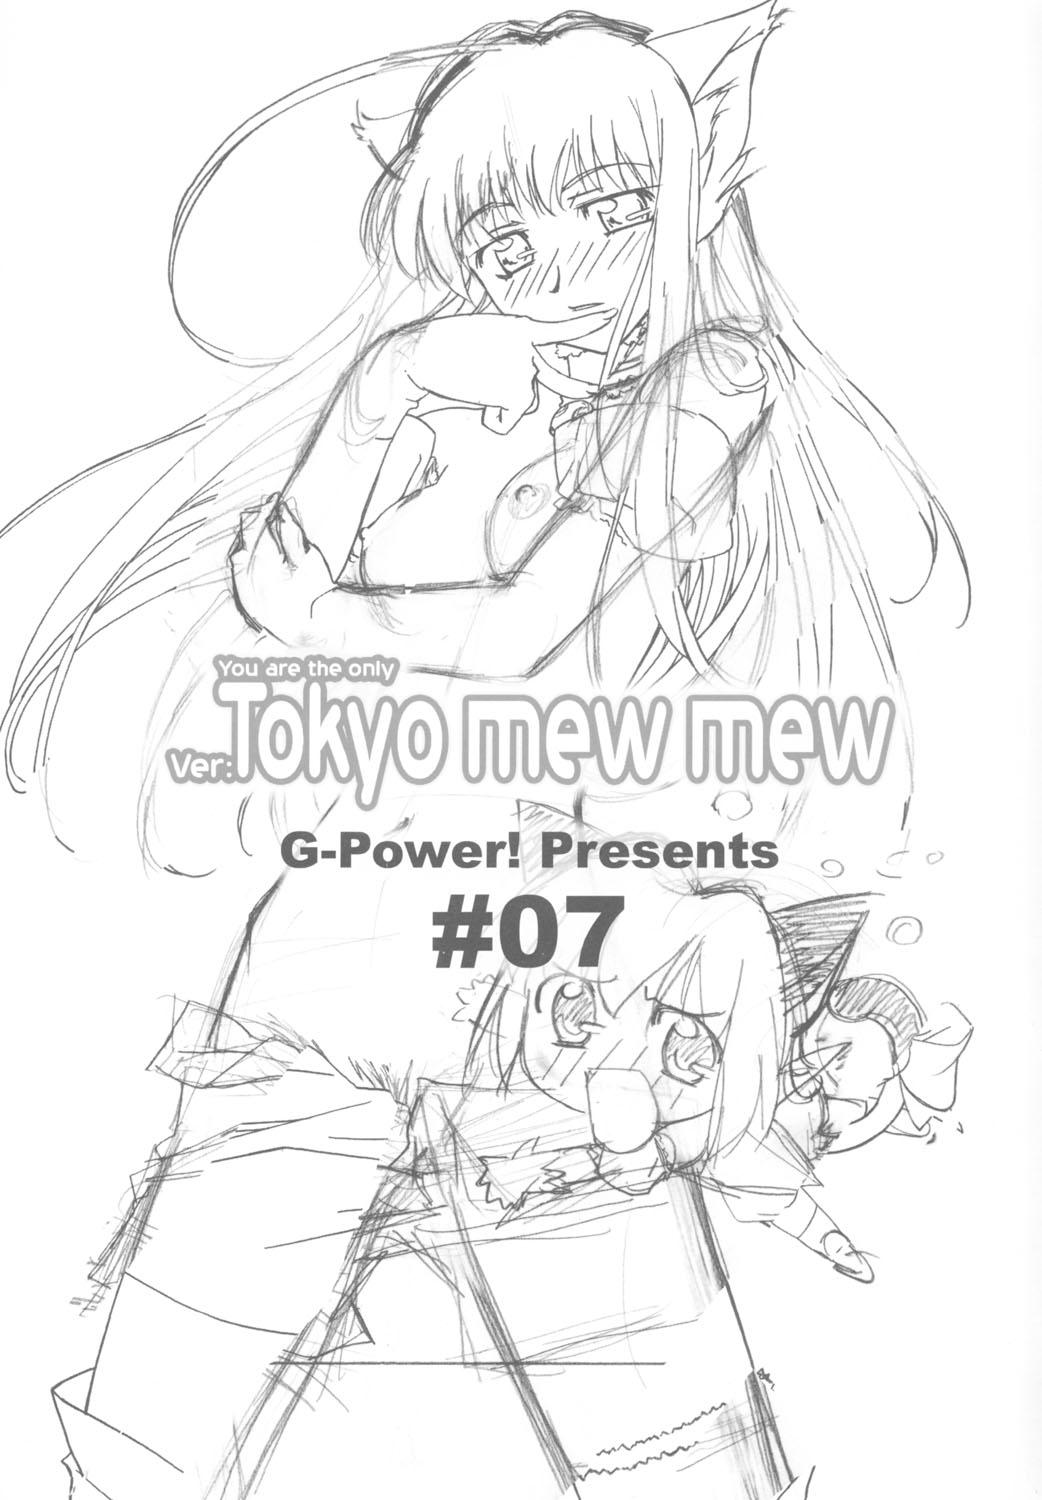 Mulata YOU ARE THE ONLY version:Tokyo mew mew - Tokyo mew mew Black Girl - Page 2